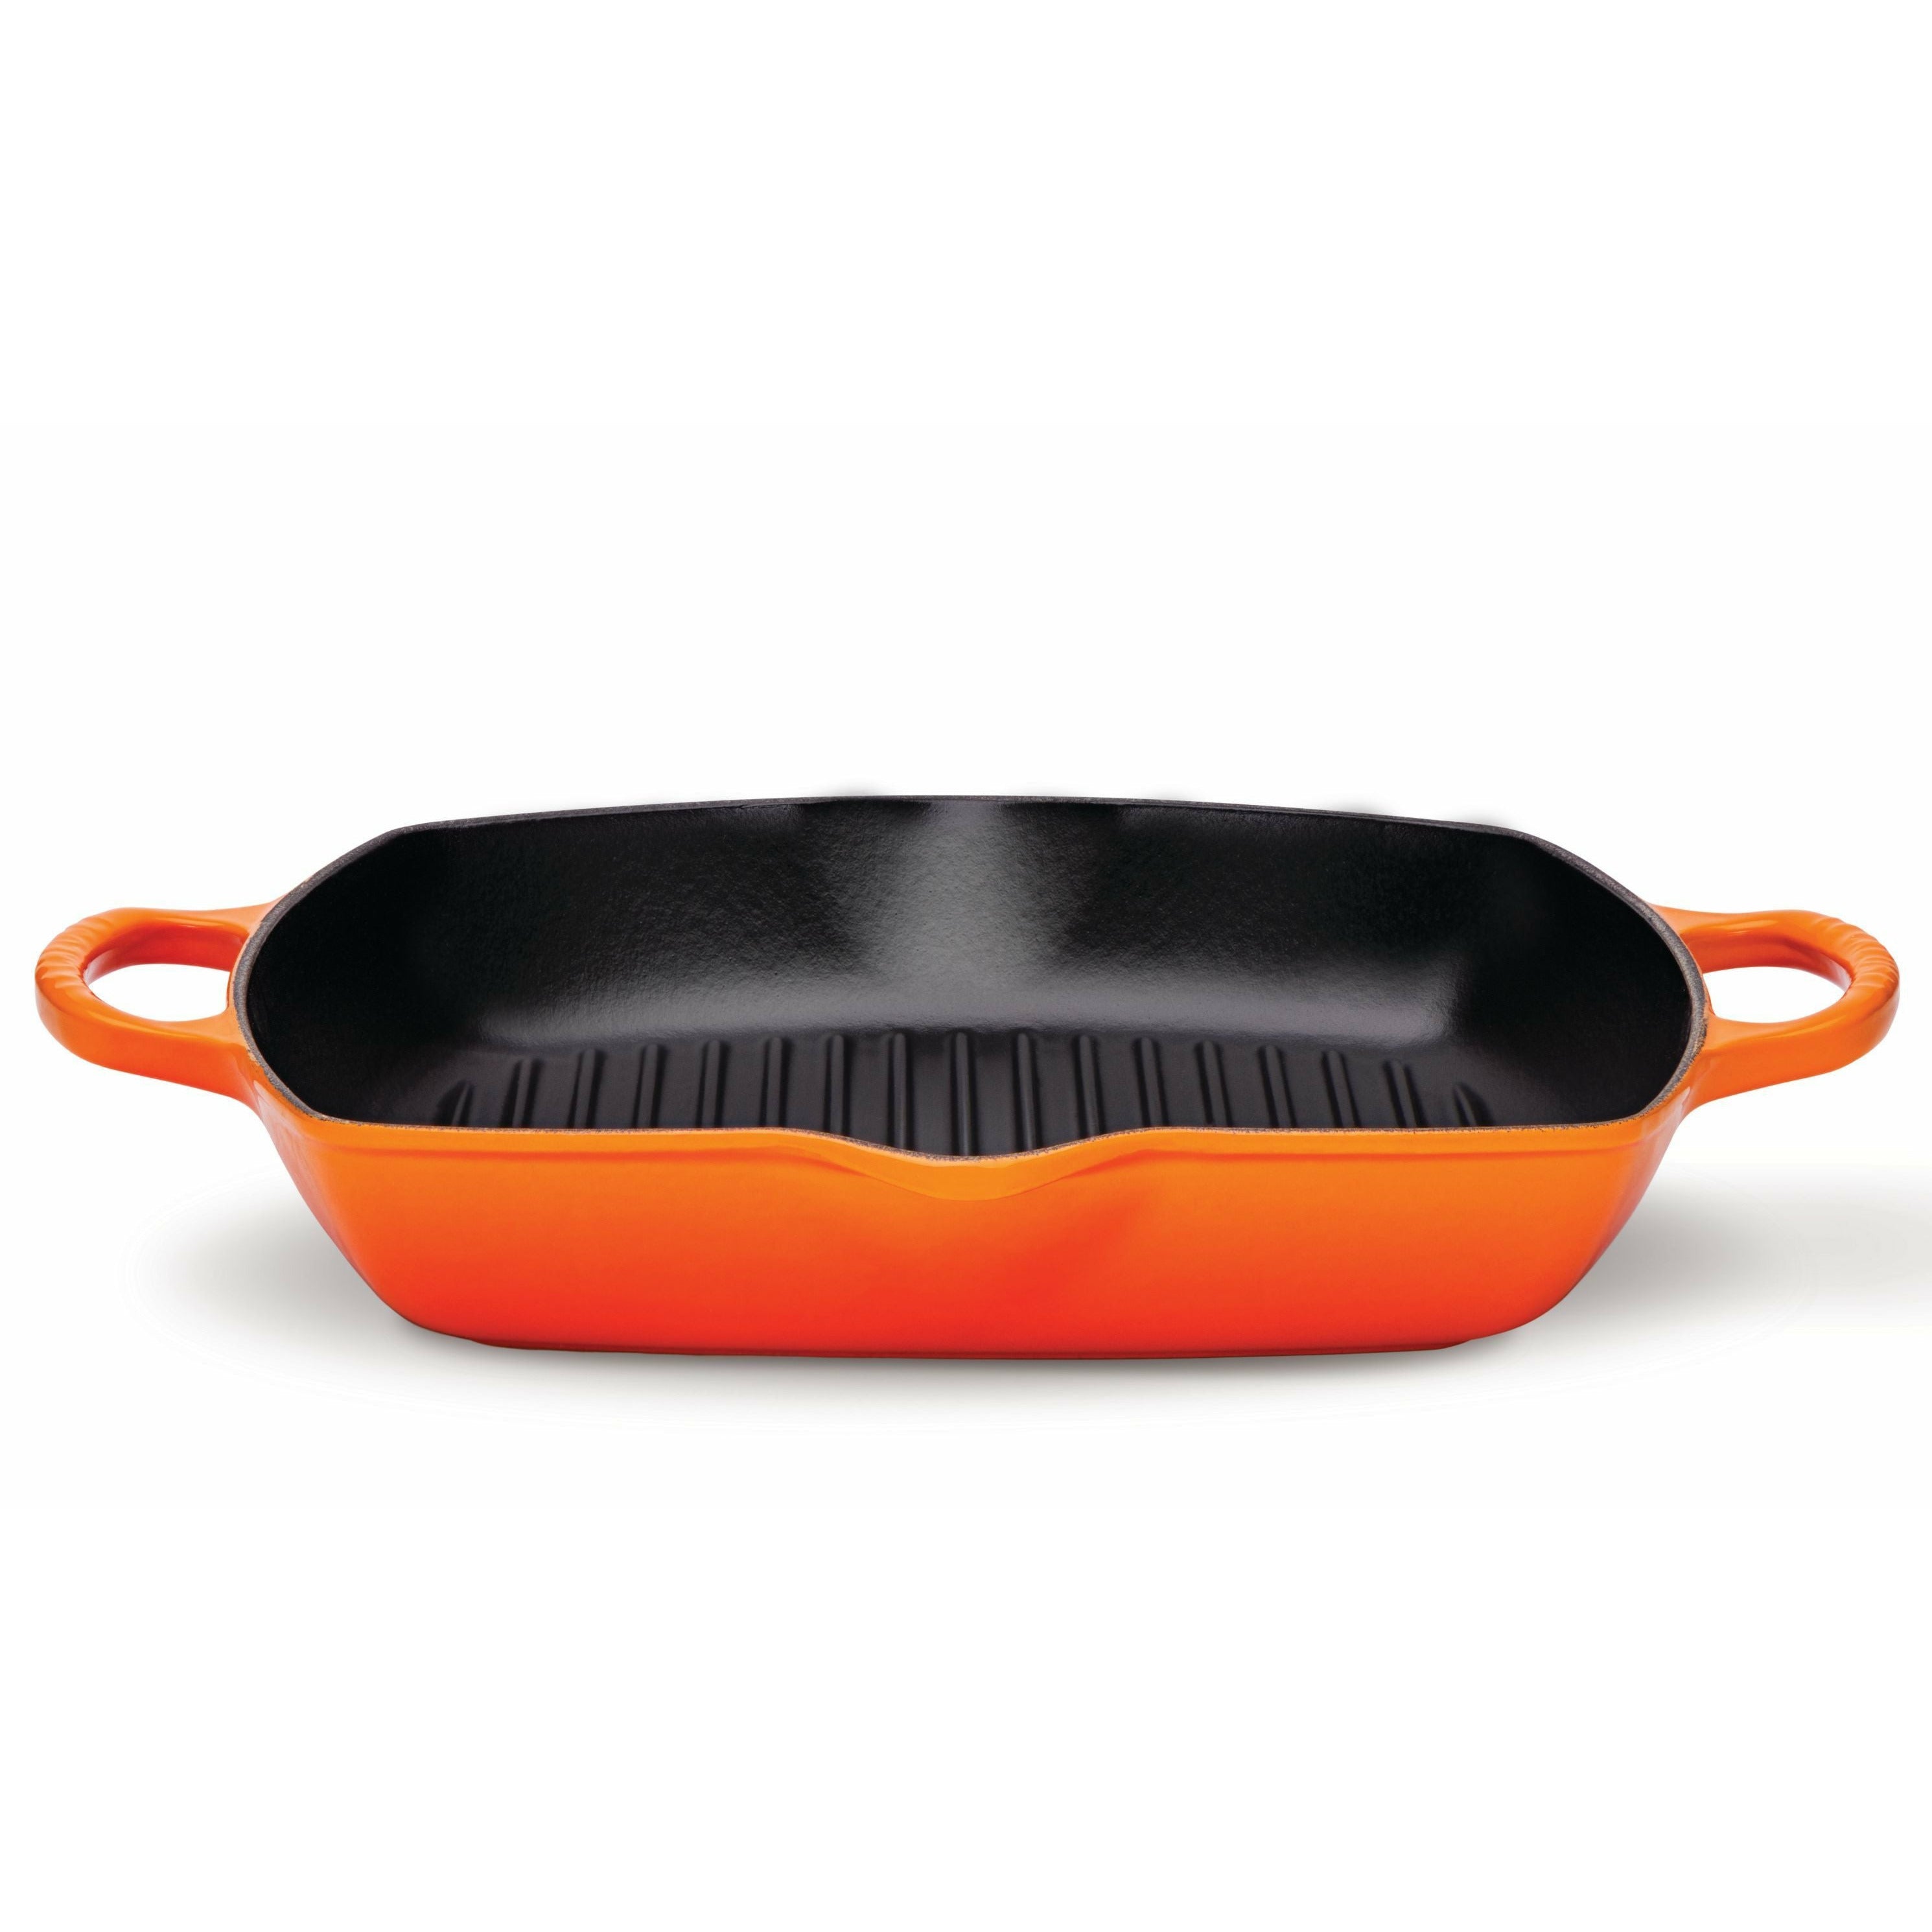 Le Creuset Nature High Square Grill Pan 30 Cm, Oven Red